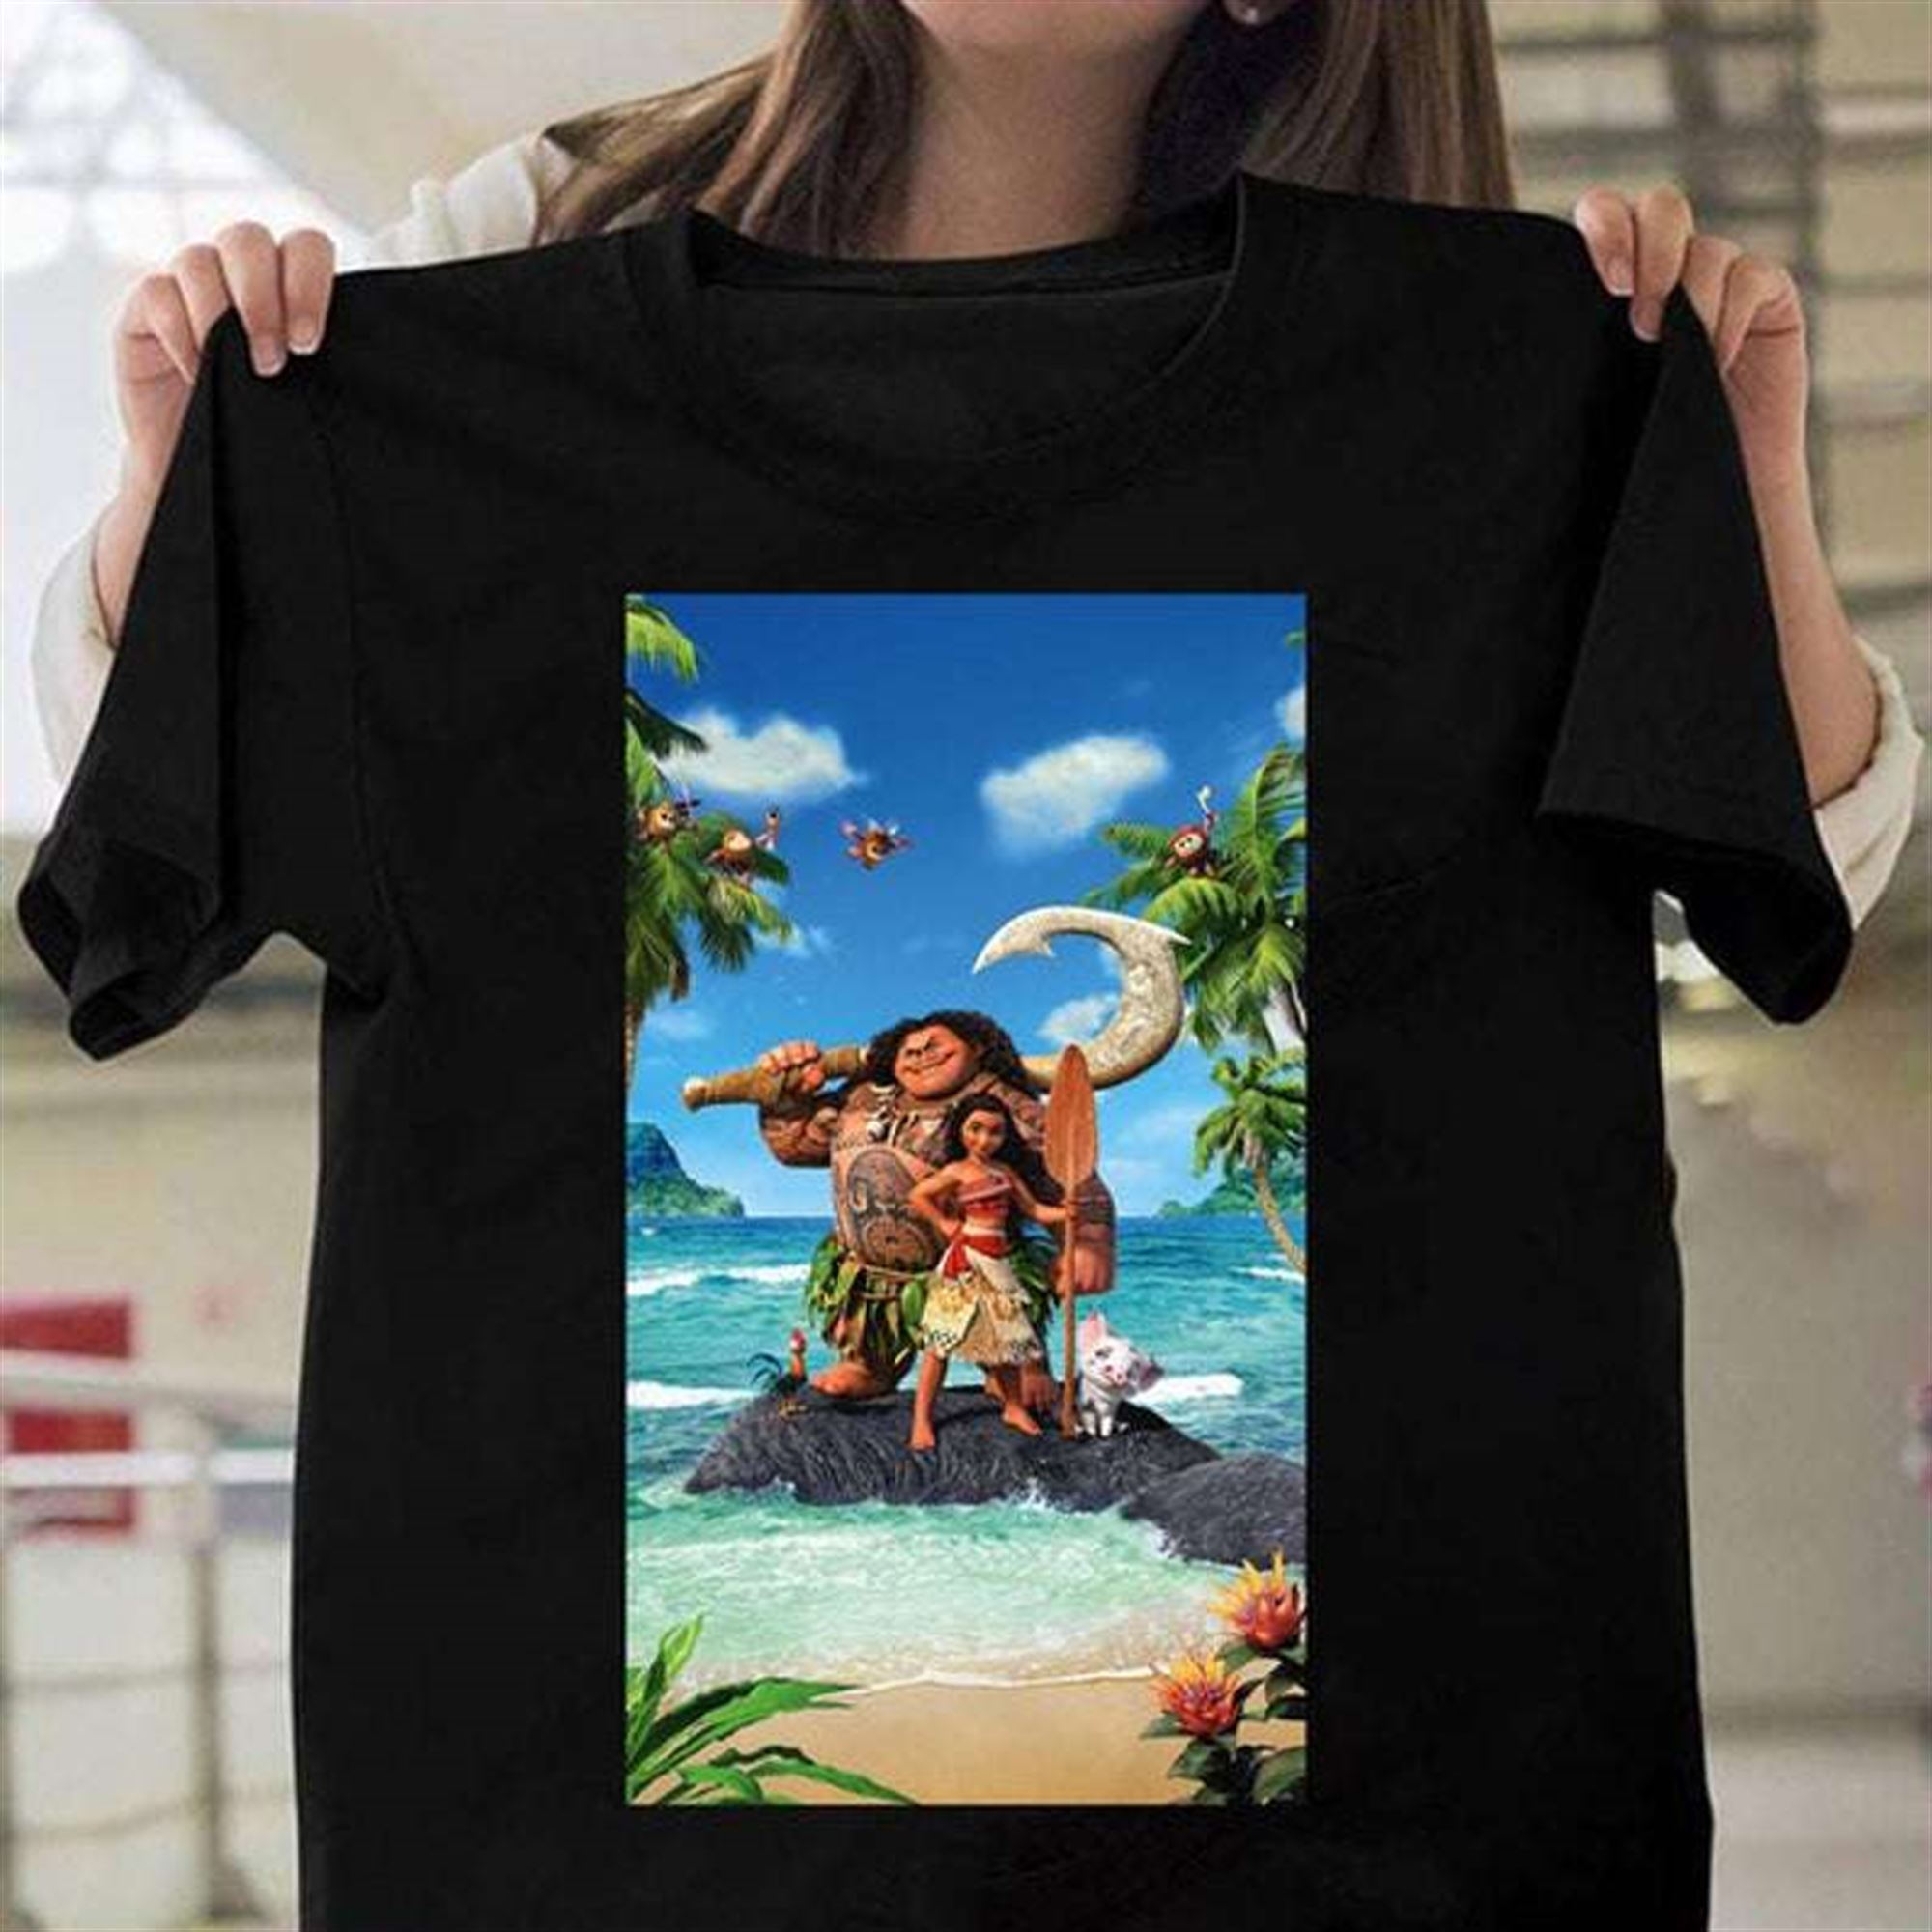 Disney Moana Find Your Own Way T Shirt Size Up To 5xl